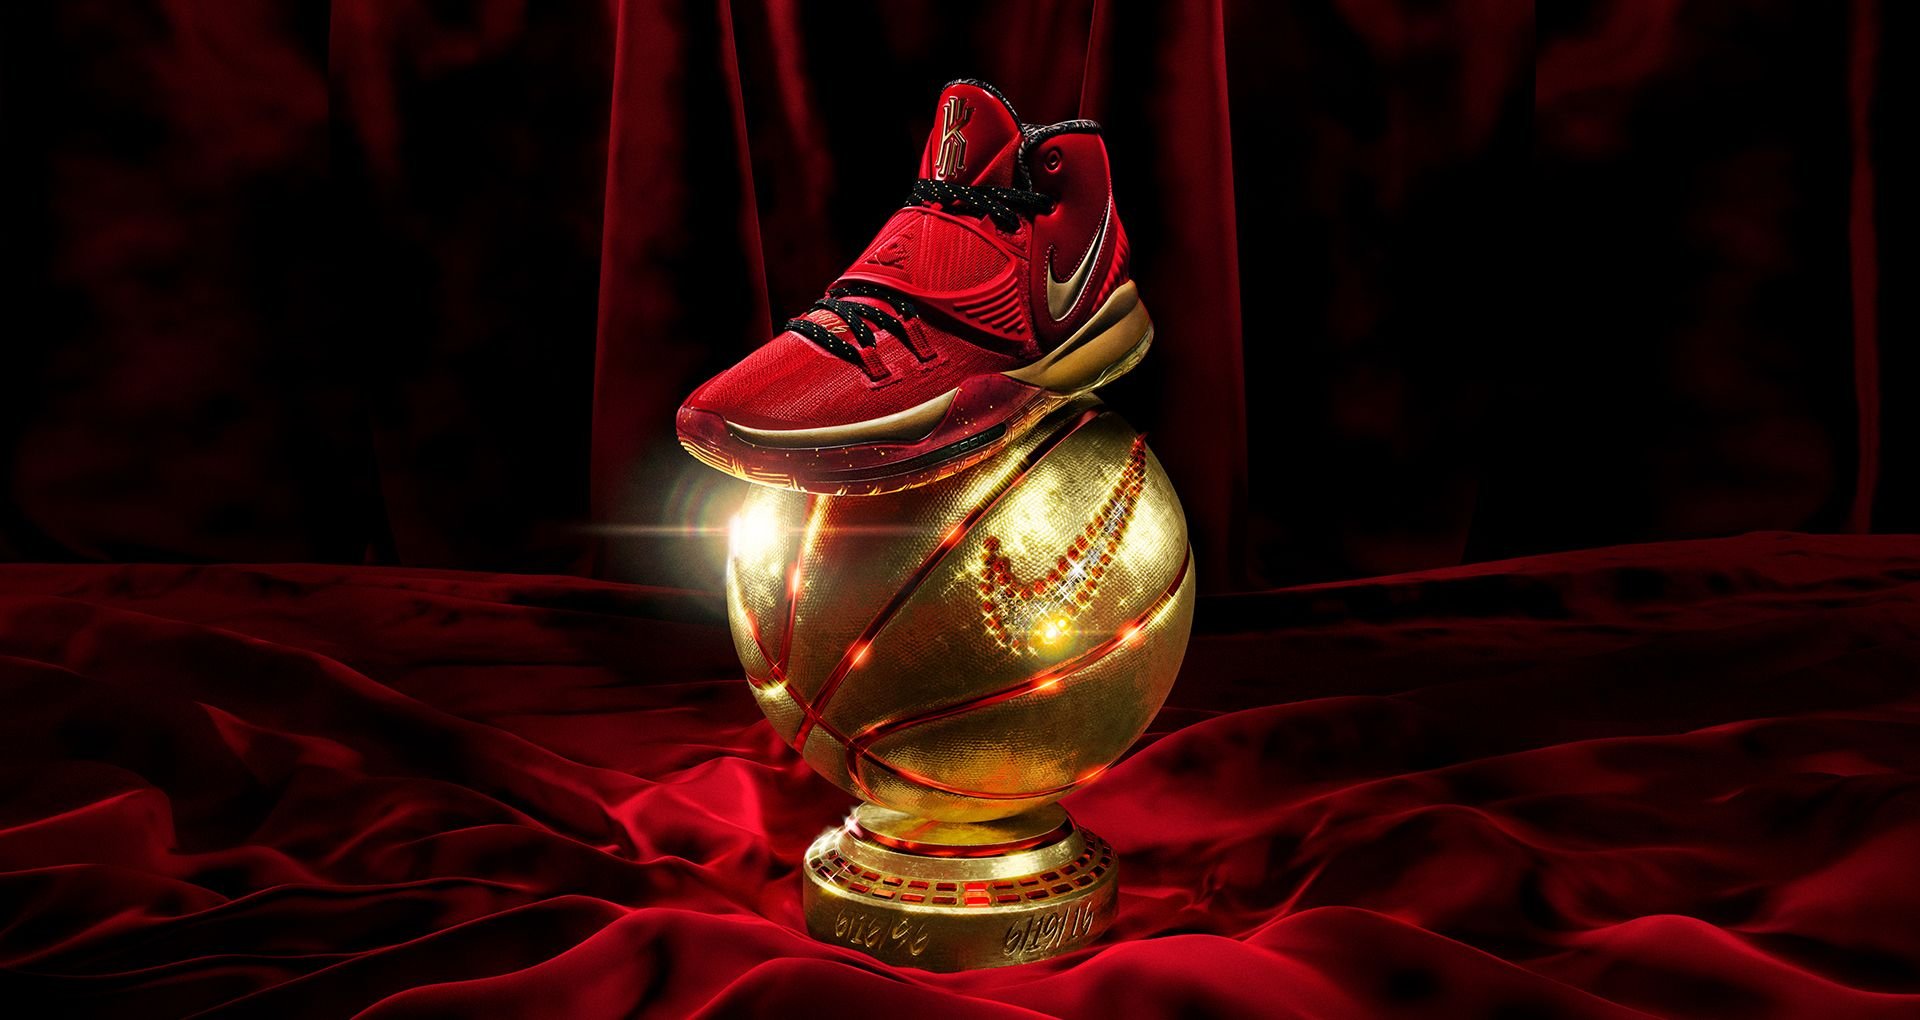 kyrie 6 trophies release date